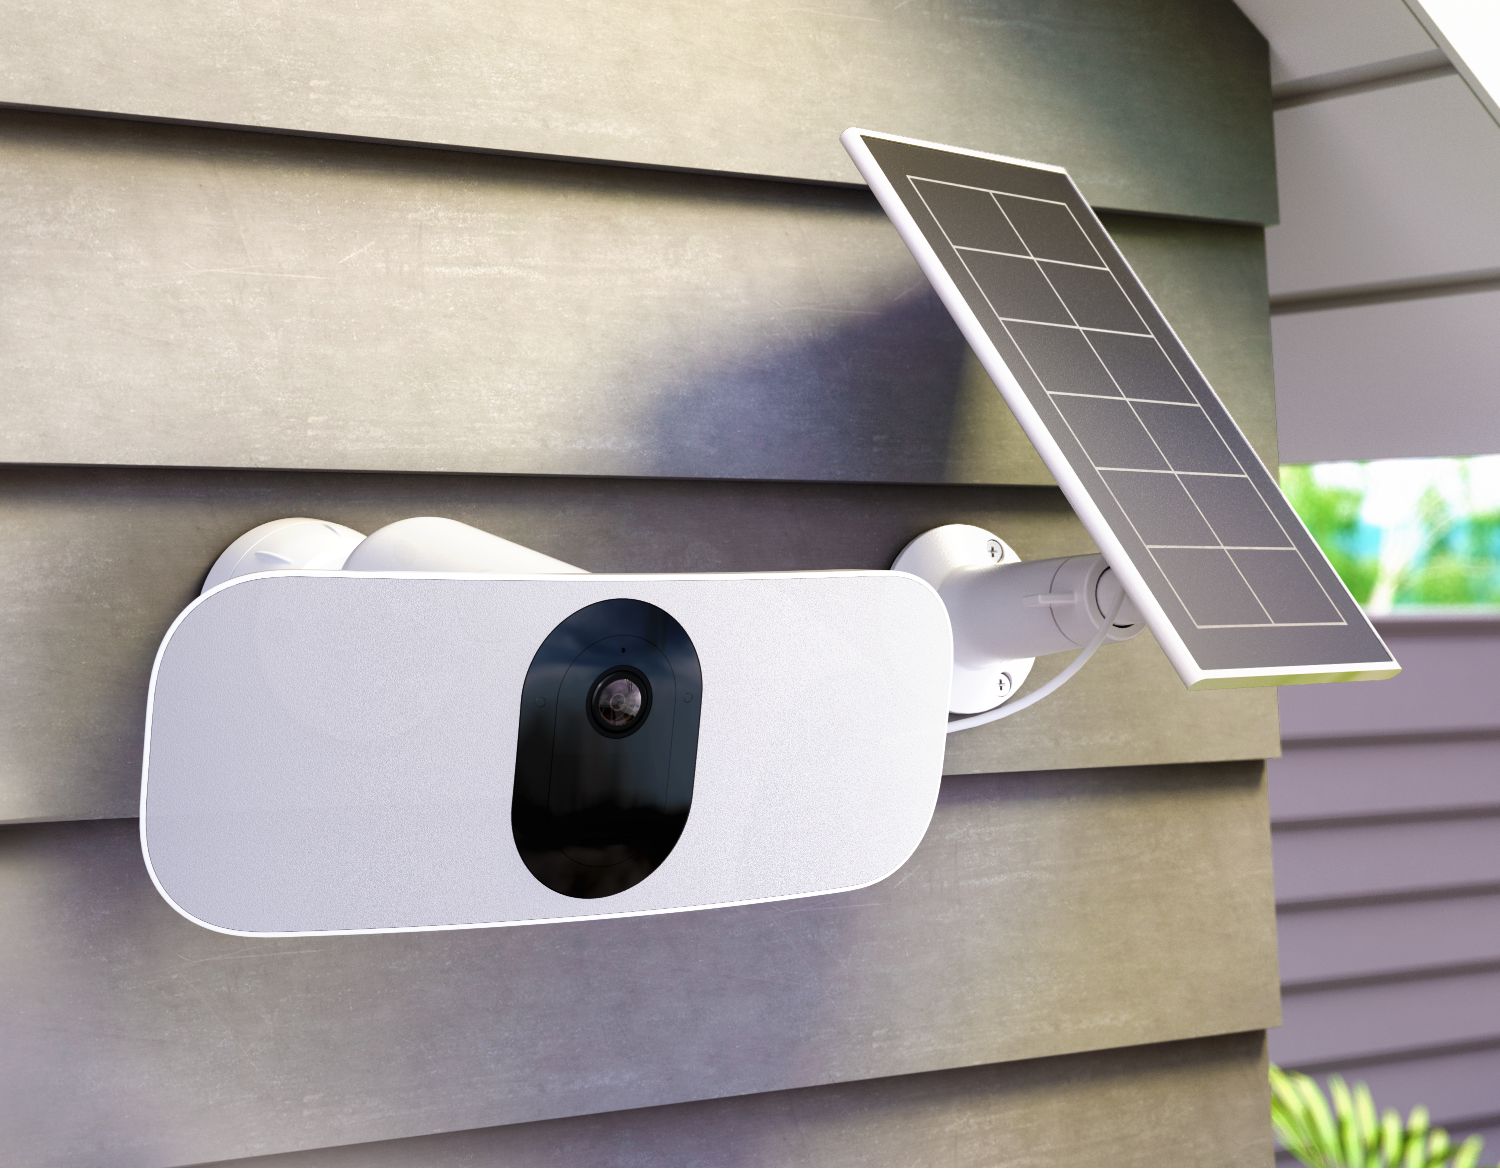 A Floodlight security camera paried with an Arlo  solar panel is attached outdoor with a rechargeable battery or charging cable for continuous power